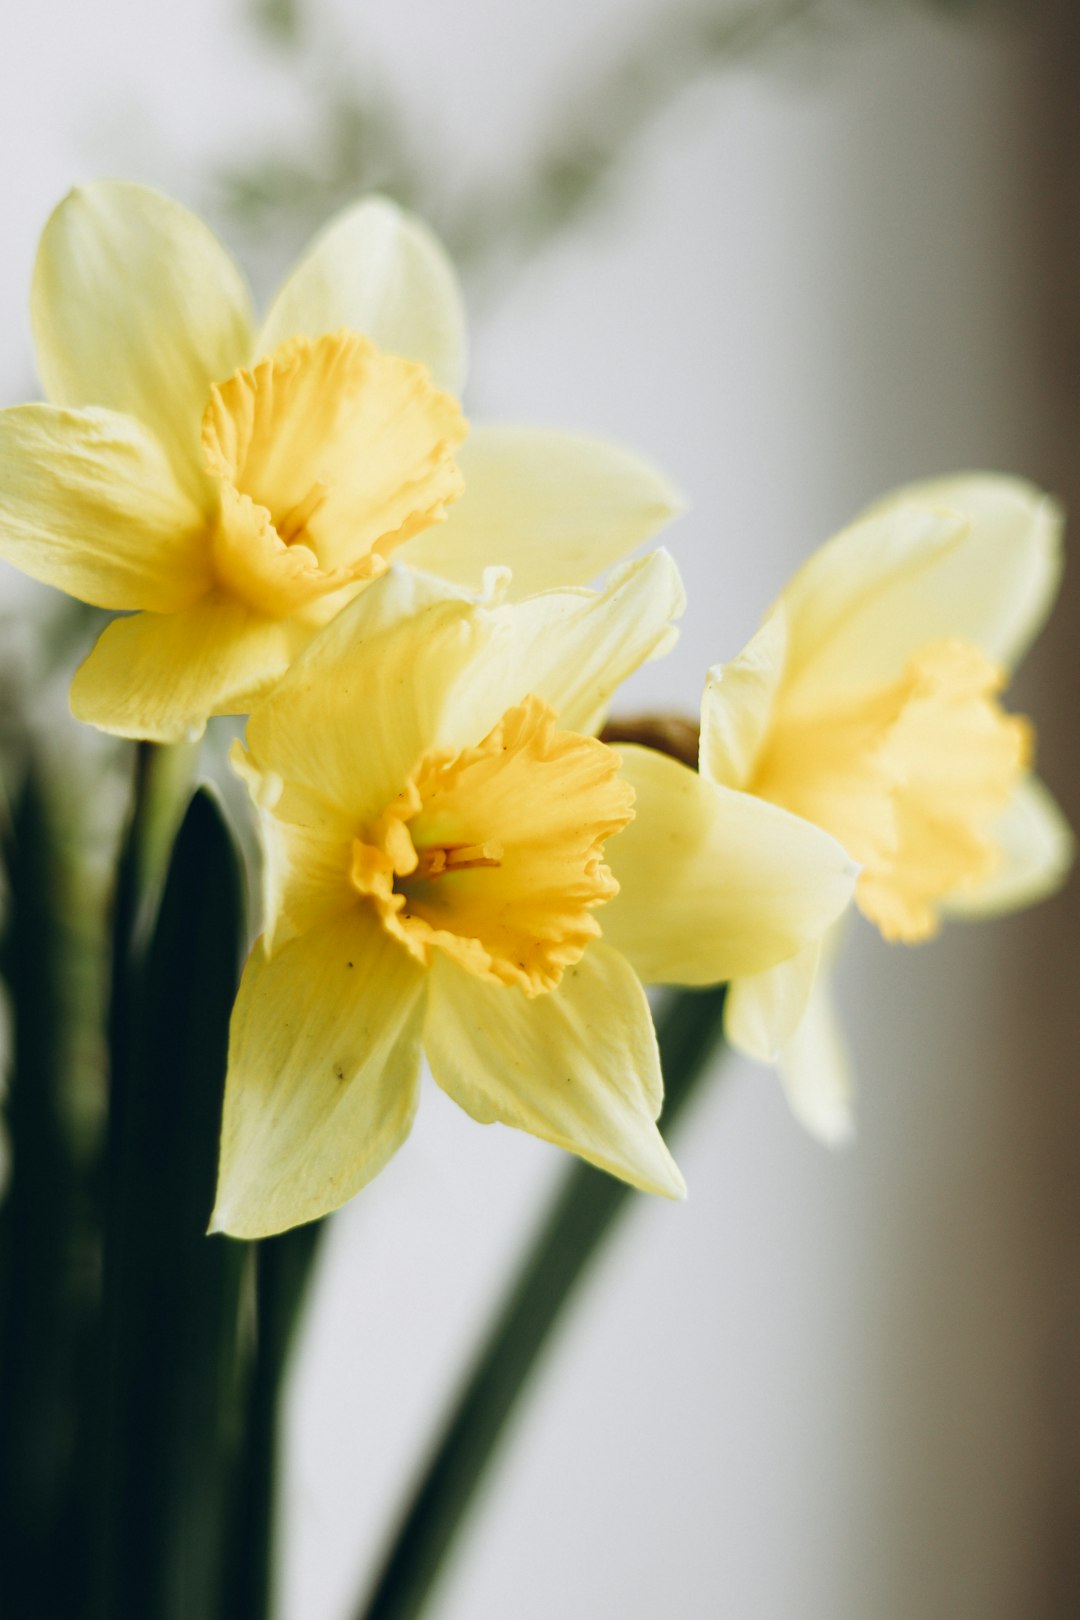 yellow daffodils in bloom close up photo